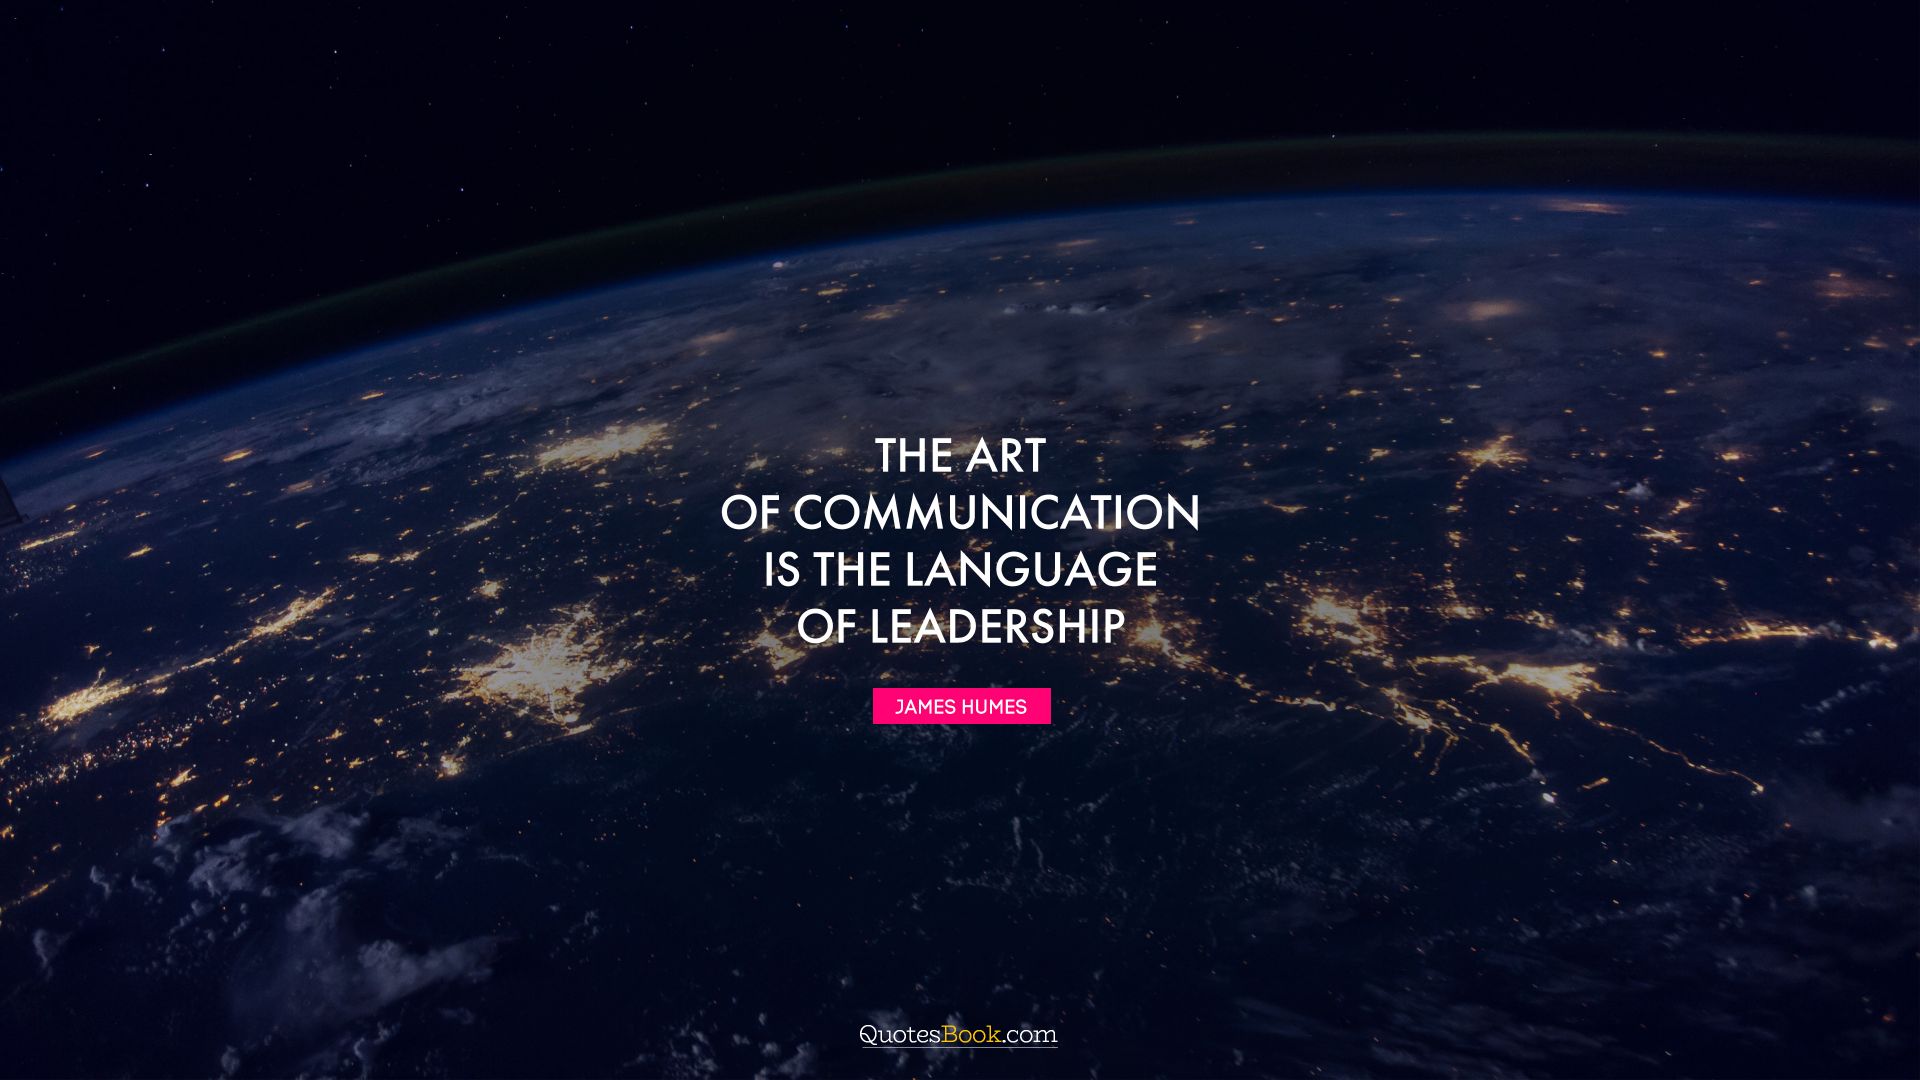 The art of communication is the language of leadership. - Quote by James Humes